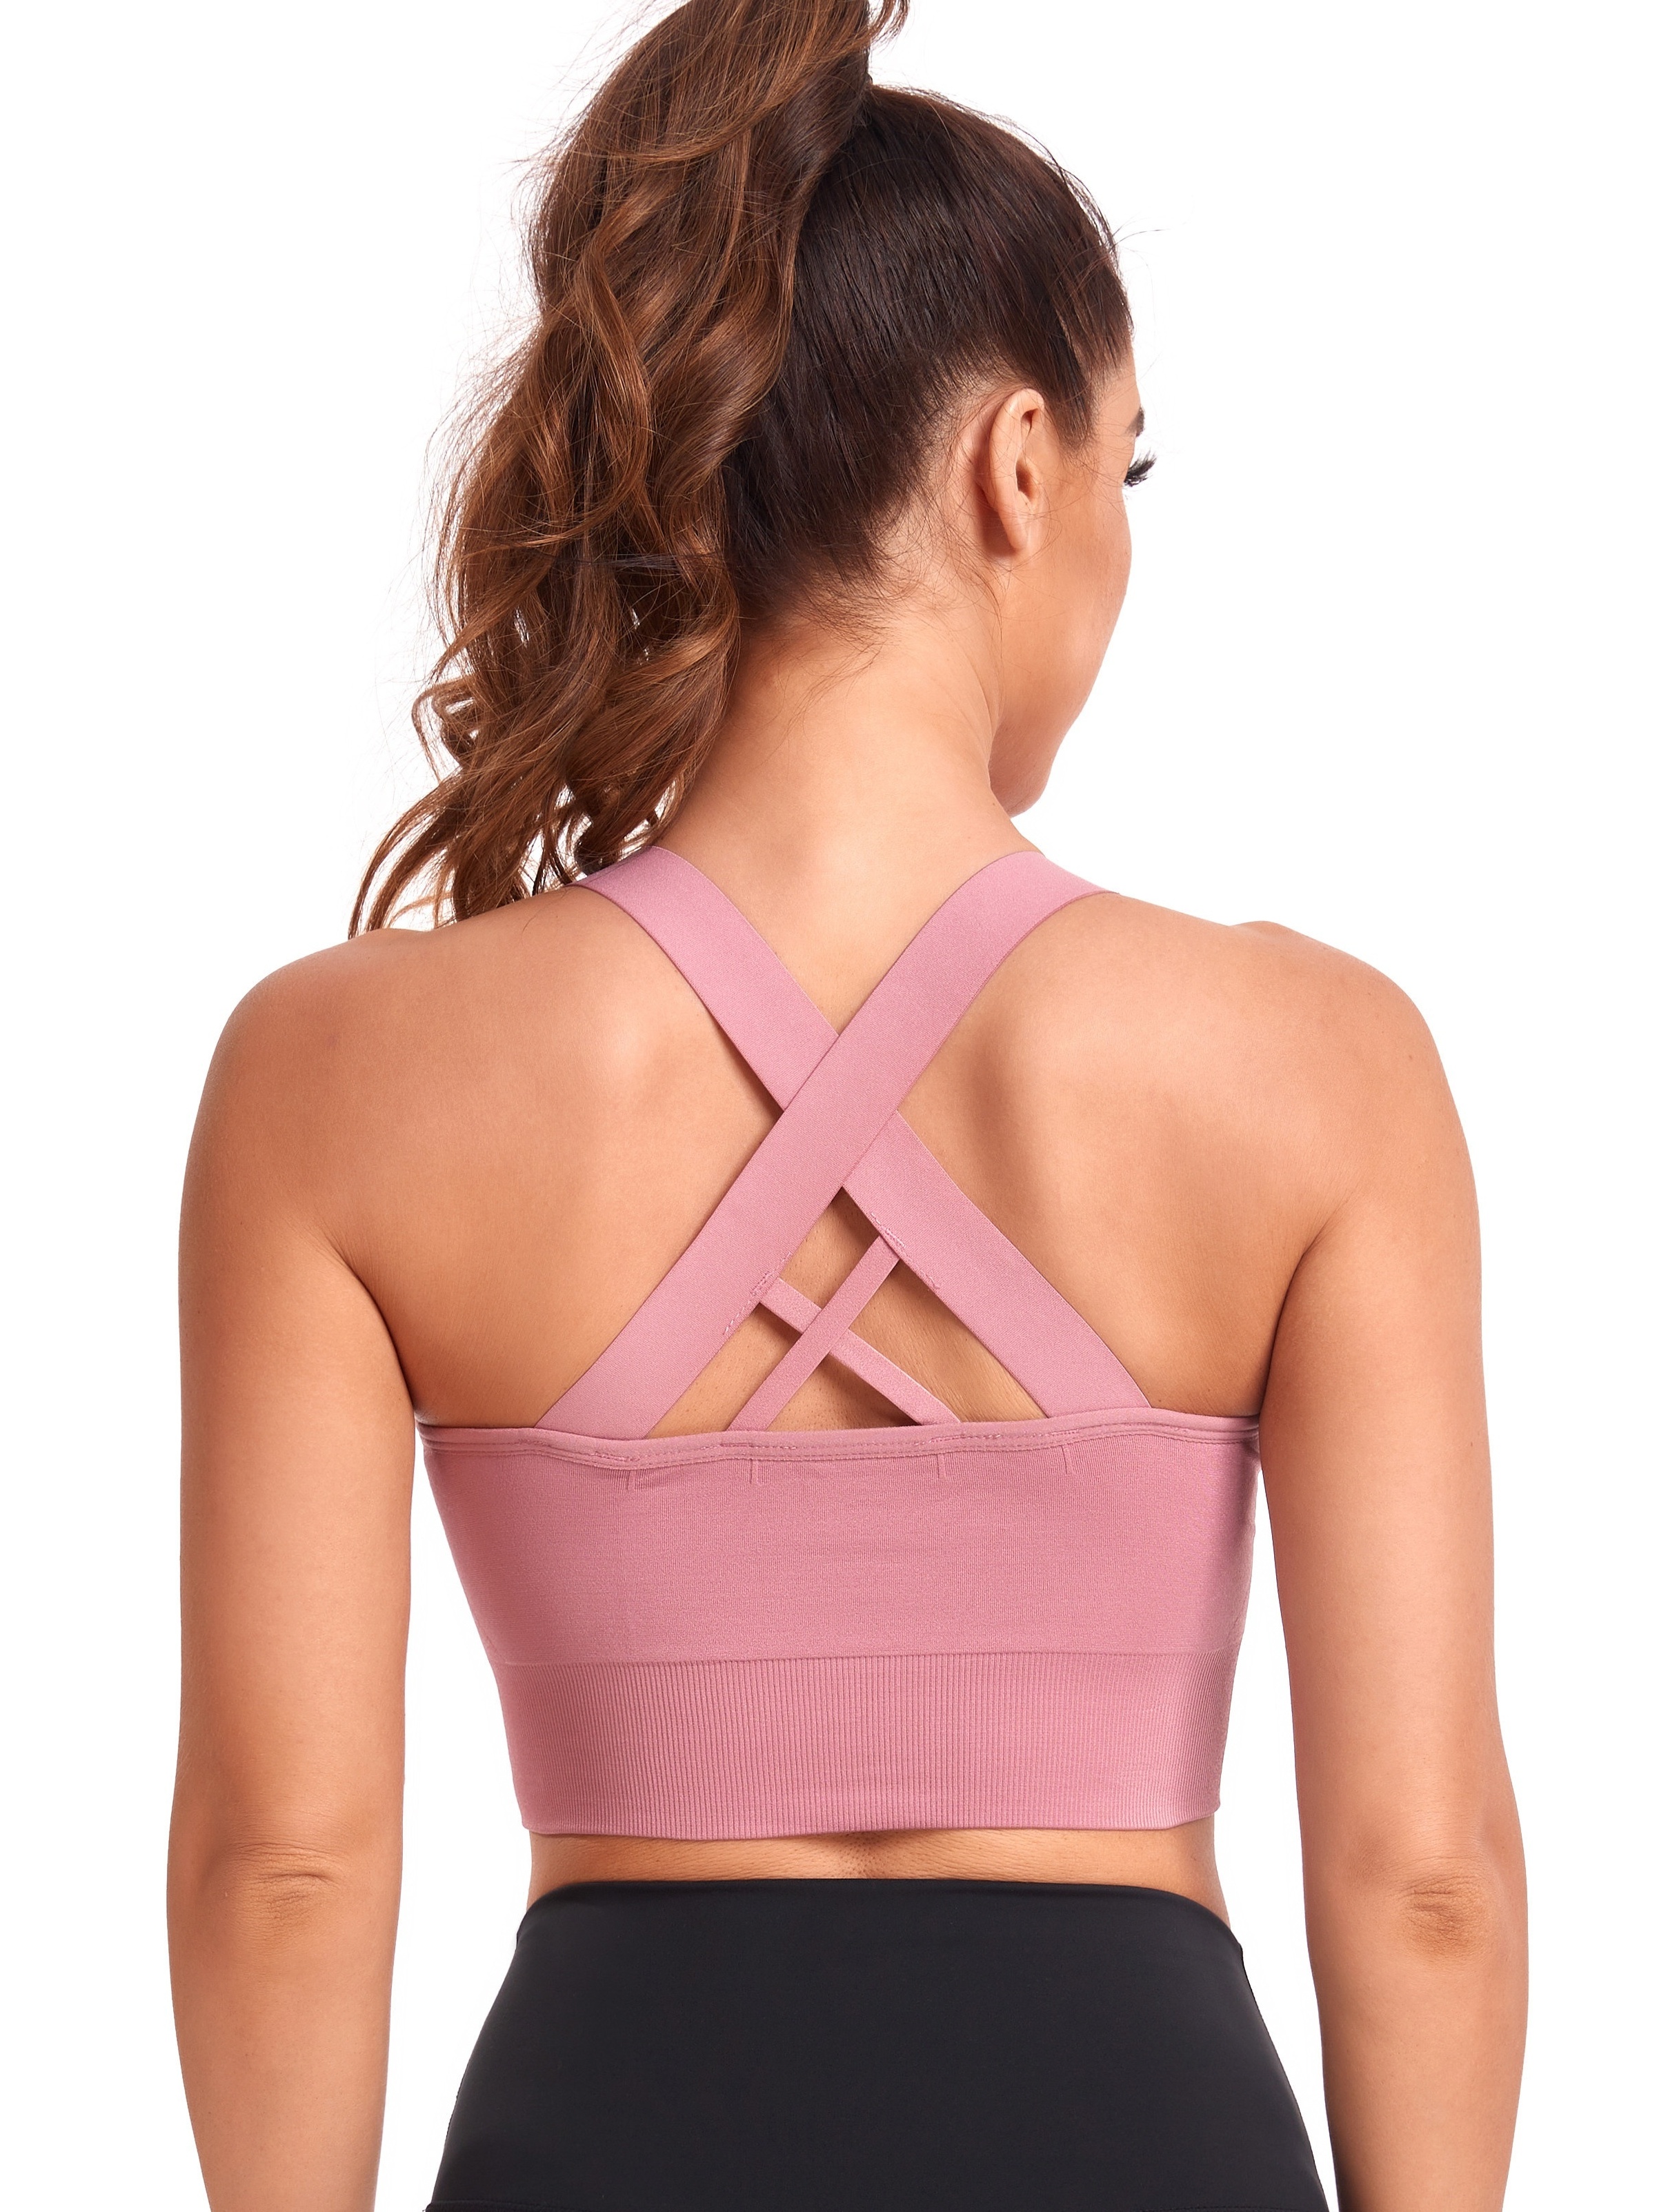 Sports Bras For Women Gym Running, Unique Cross Back Strappy